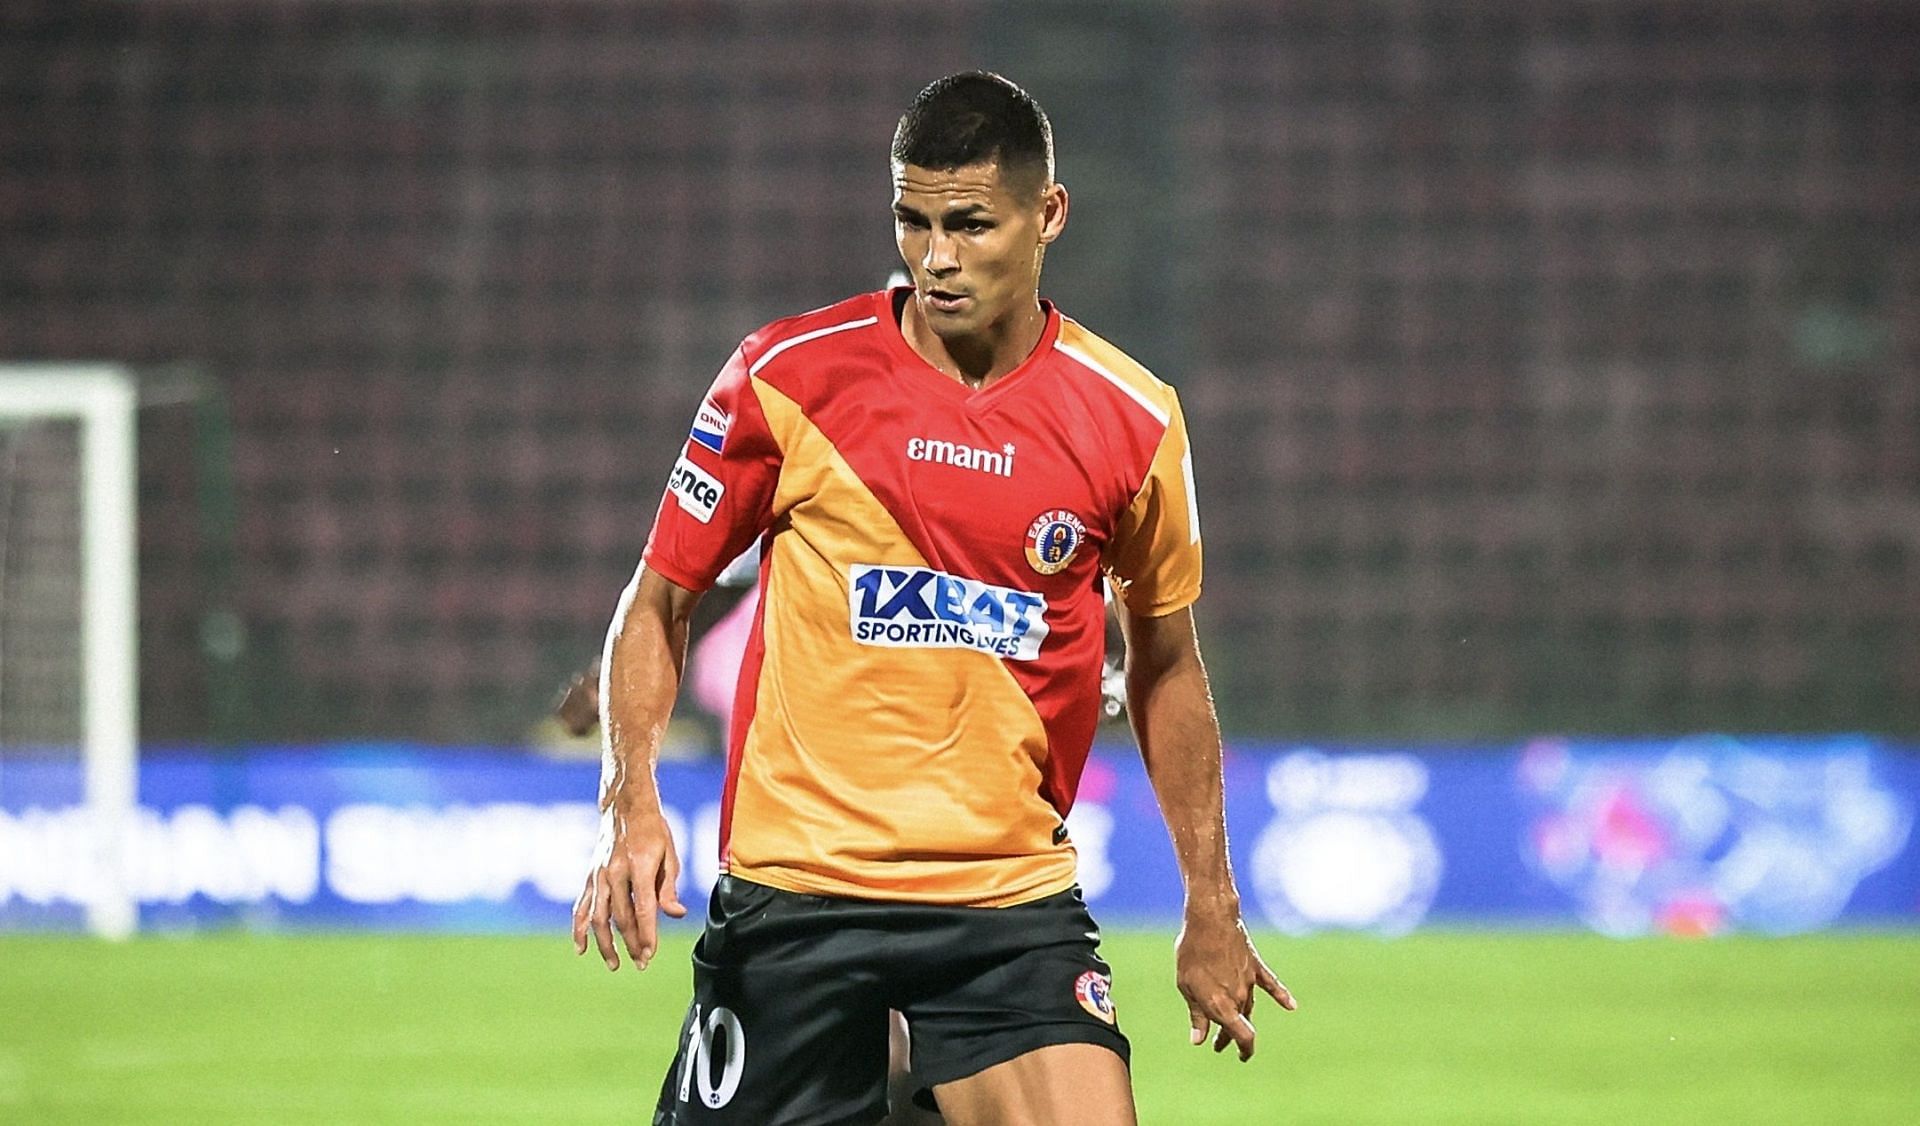 Cleiton Silva has scored two goals for East Bengal in the ISL.